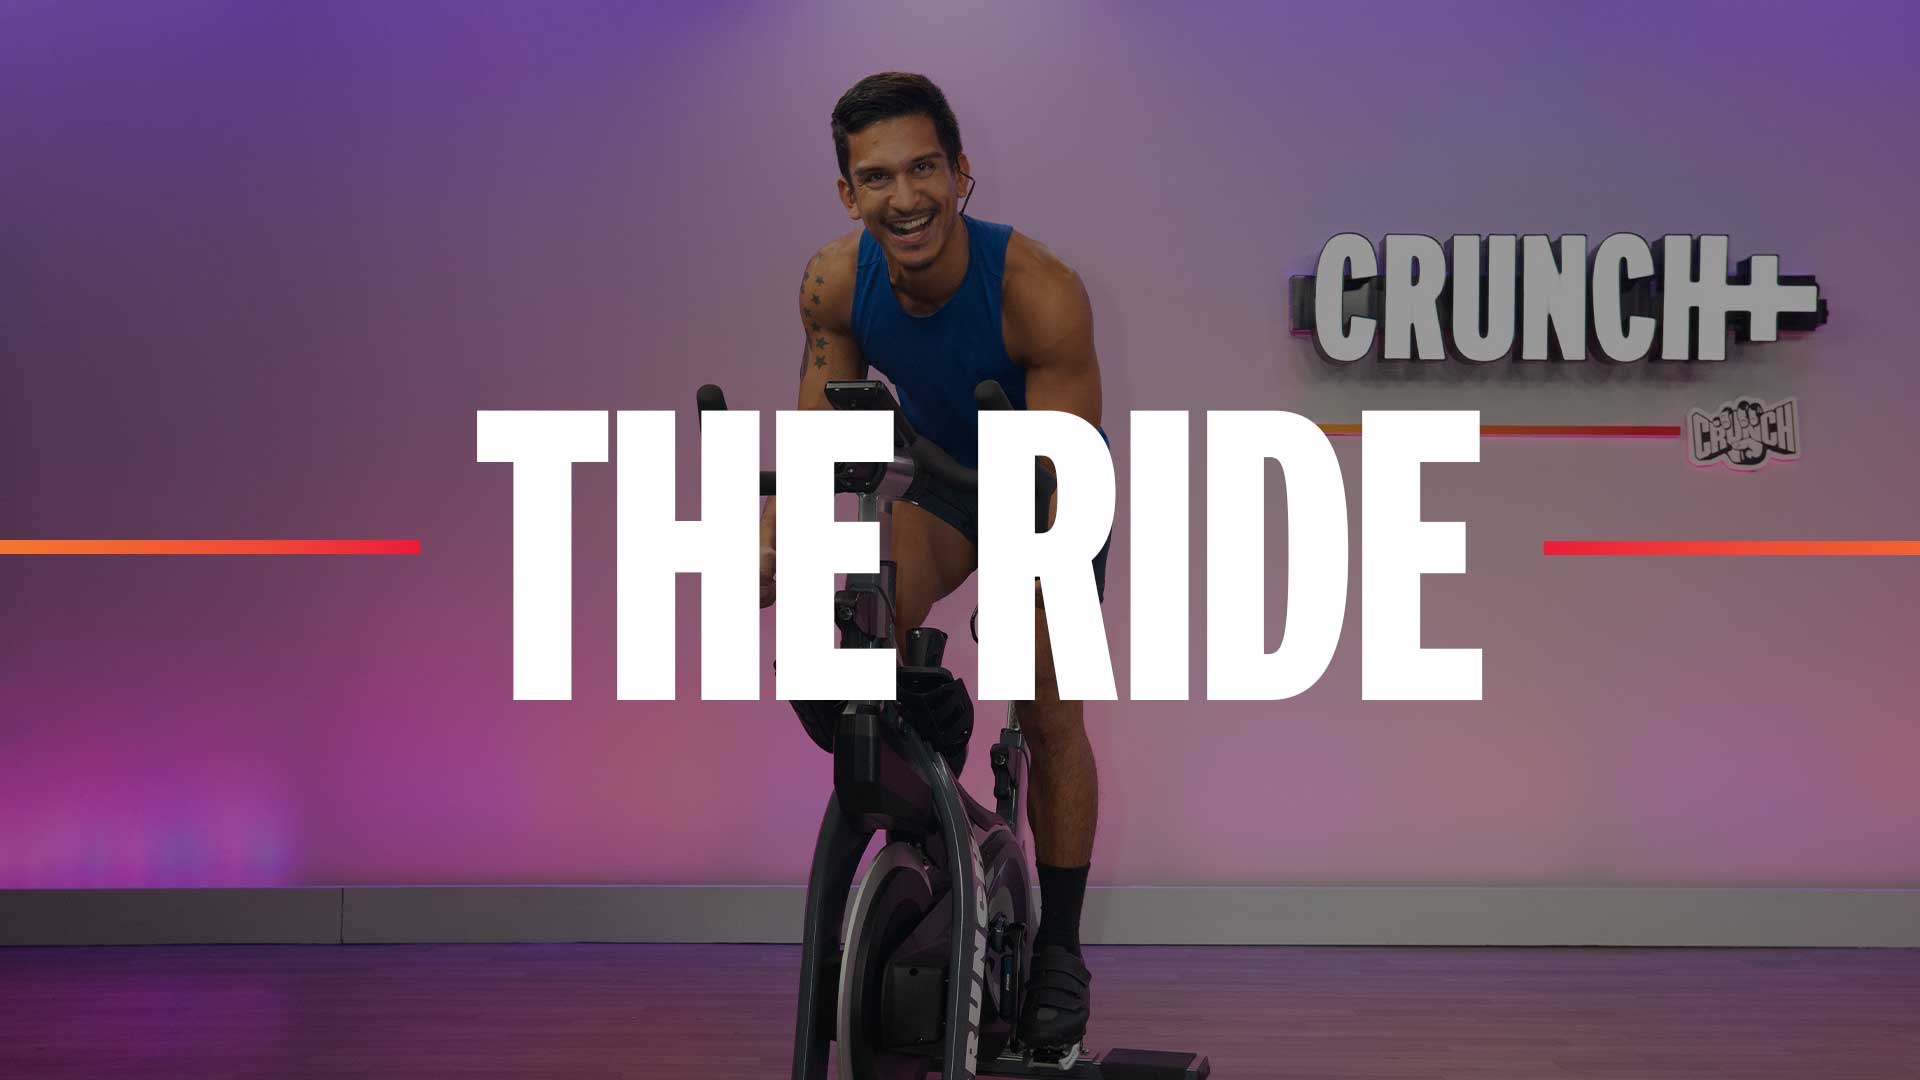 The Ride by Crunch+